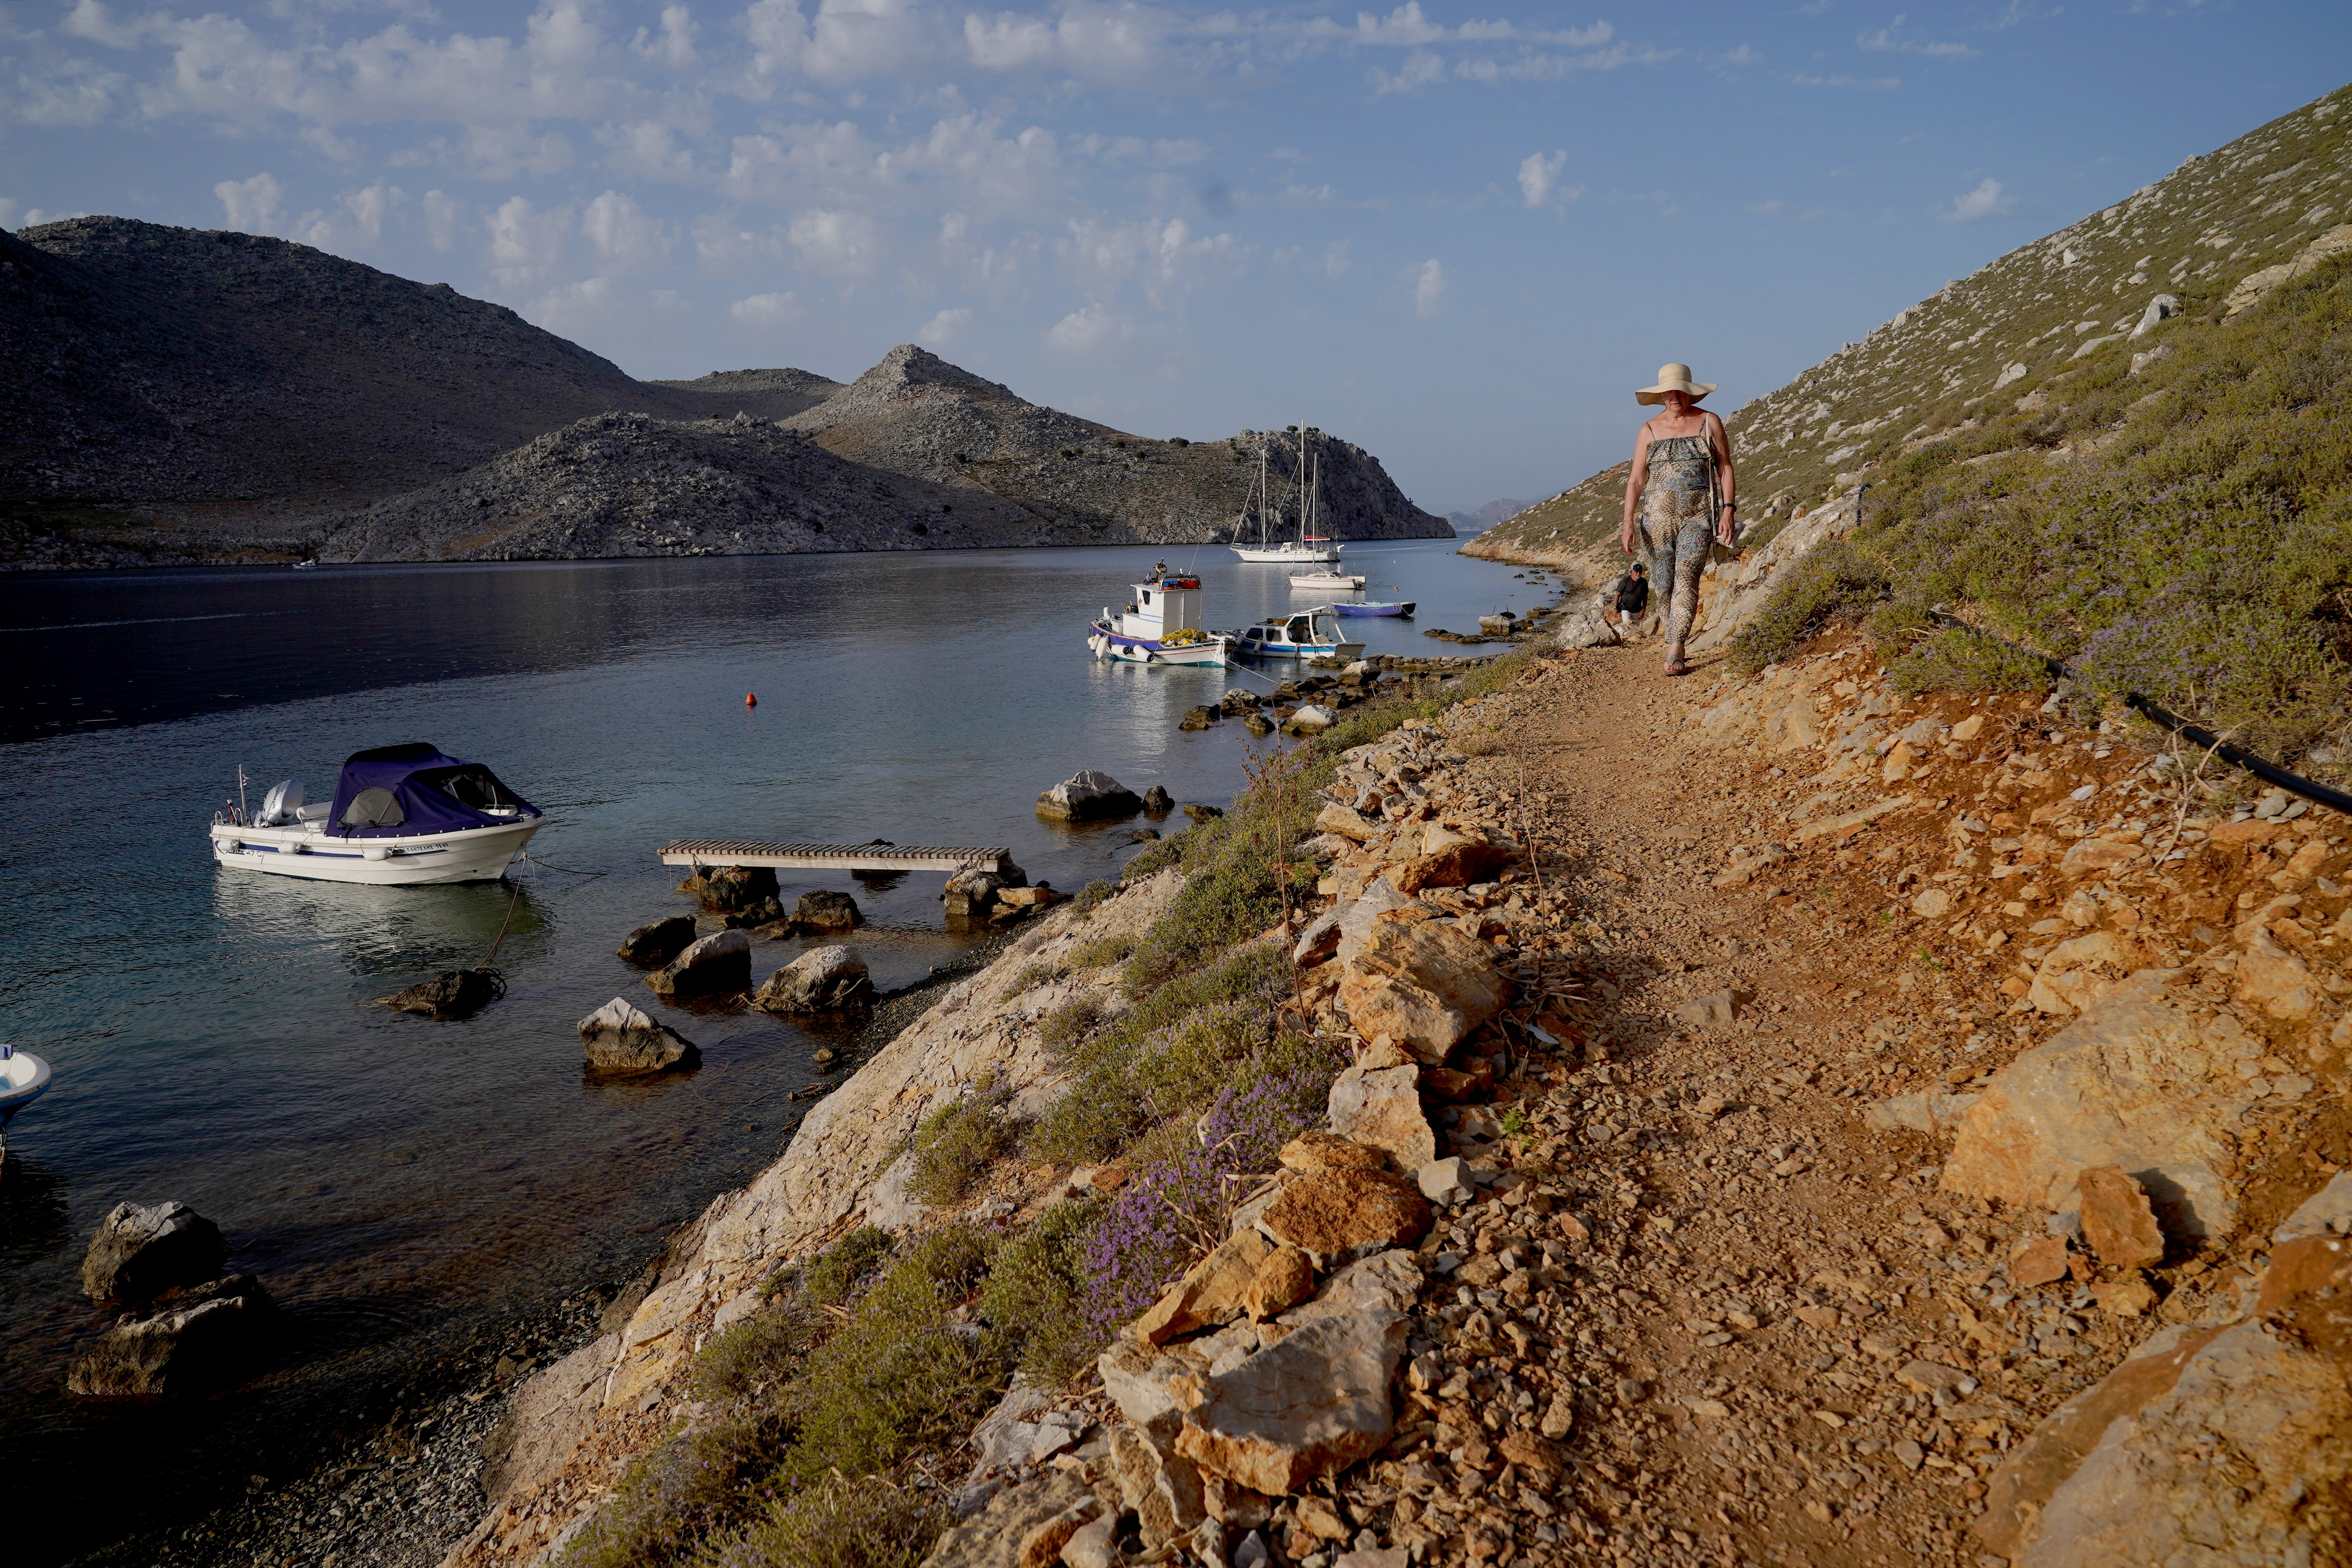 A rocky path near Saint Nikolas Beach in the Pedi district in Symi, Greece, where a search and rescue operation is under way for TV doctor and columnist Michael Mosley after he went missing while on holiday.